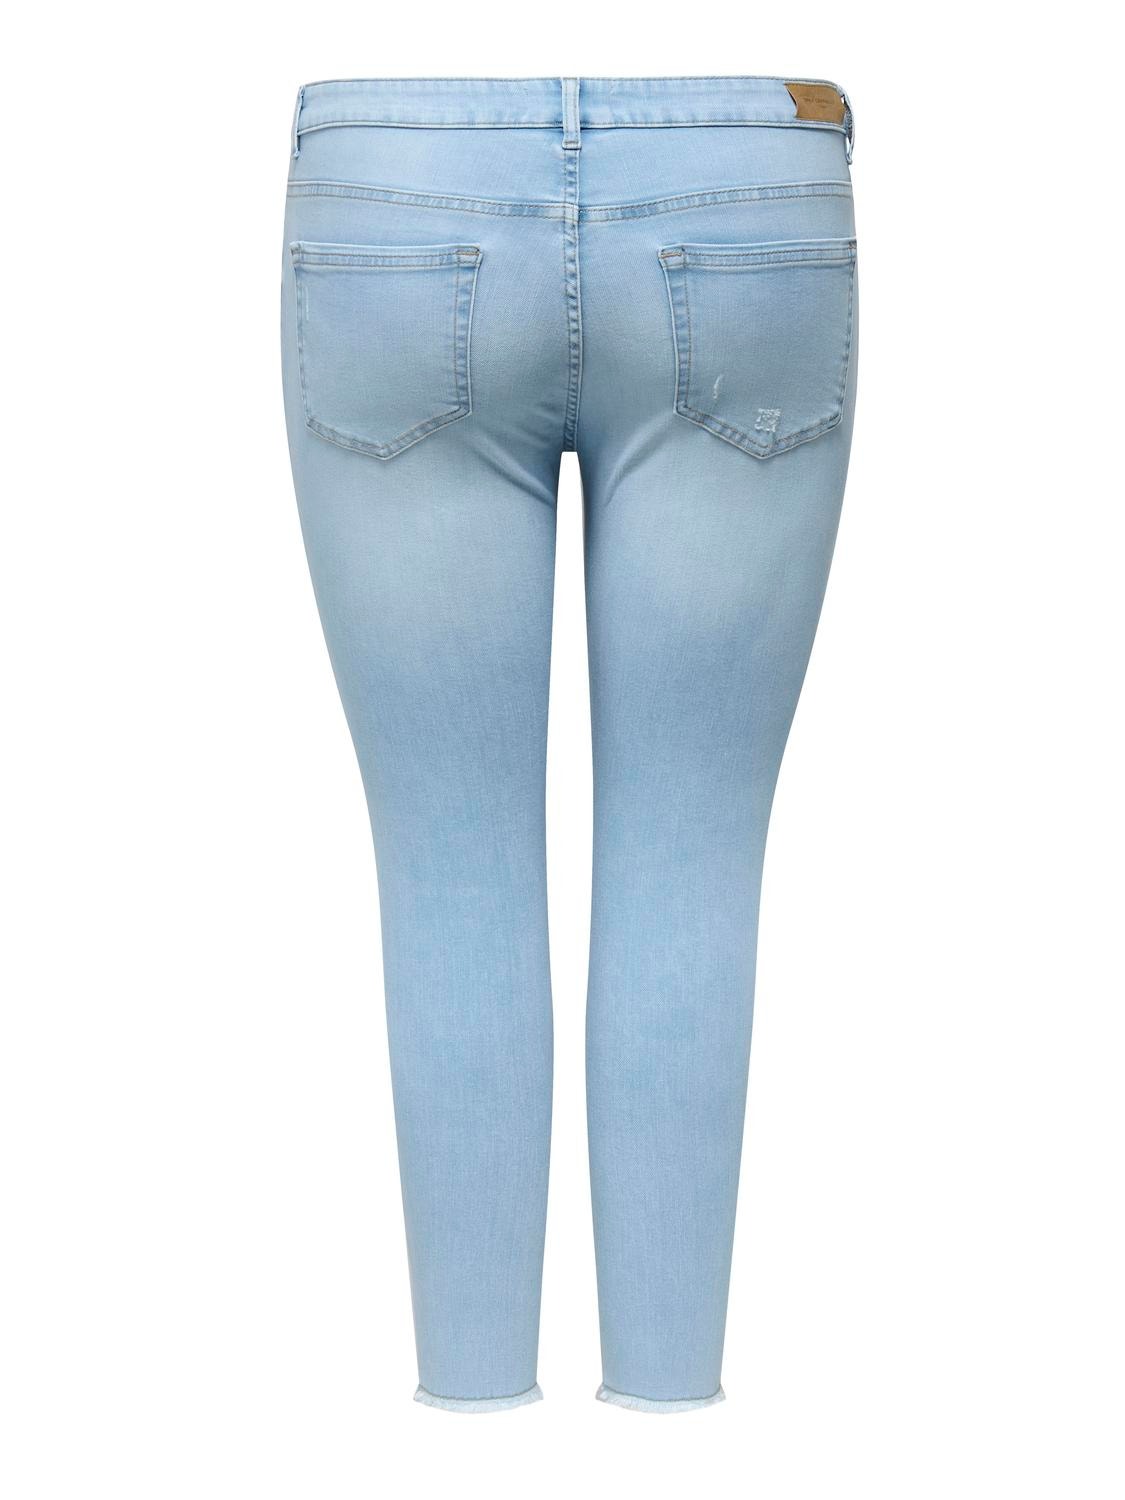 ONLY Skinny Fit Raw hems Jeans -Light Blue Bleached Denim - 15318334